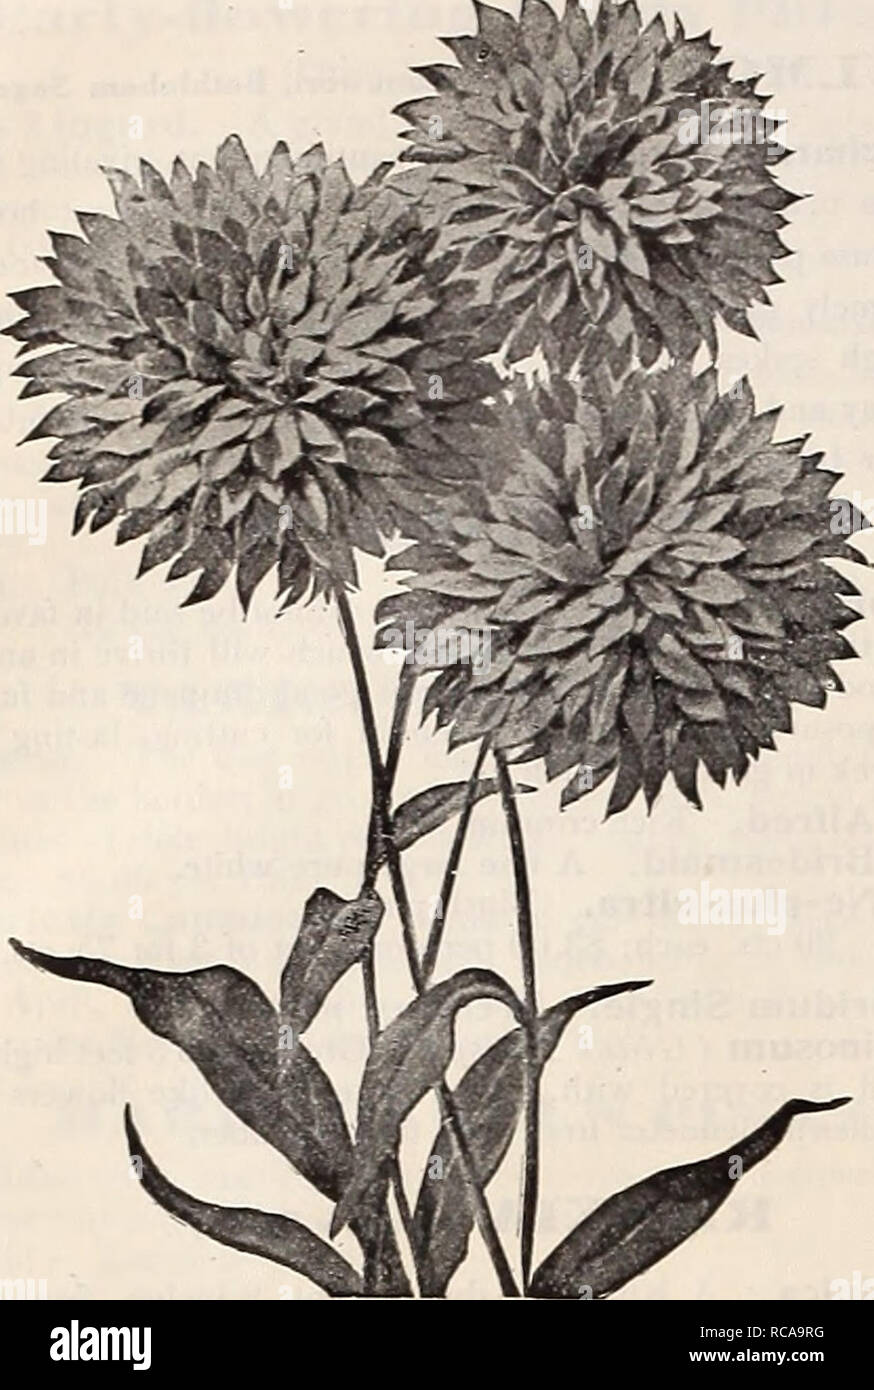 . Dreer's 1910 autumn catalogue. Bulbs (Plants) Catalogs; Flowers Seeds Catalogs; Gardening Equipment and supplies Catalogs; Nurseries (Horticulture) Catalogs; Fruit Seeds Catalogs; Vegetables Seeds Catalogs. •54 1EMRYADREER PHILADELPHIA PA&quot;^Sf HARDY PERENNIAL PLANTS. Rudbeckia Rays of Gold. RIDBECKIA (Cone Flower Fulgida. Brilliant orange-yellow flowers, produced in masses, from July to September; 2 feet high. Golden Glow. We question if any one hardy perennial plant has ever met with greater popularity than this. Froduce&gt; masses of double golden-yellow Dahlia-like flowers from July t Stock Photo